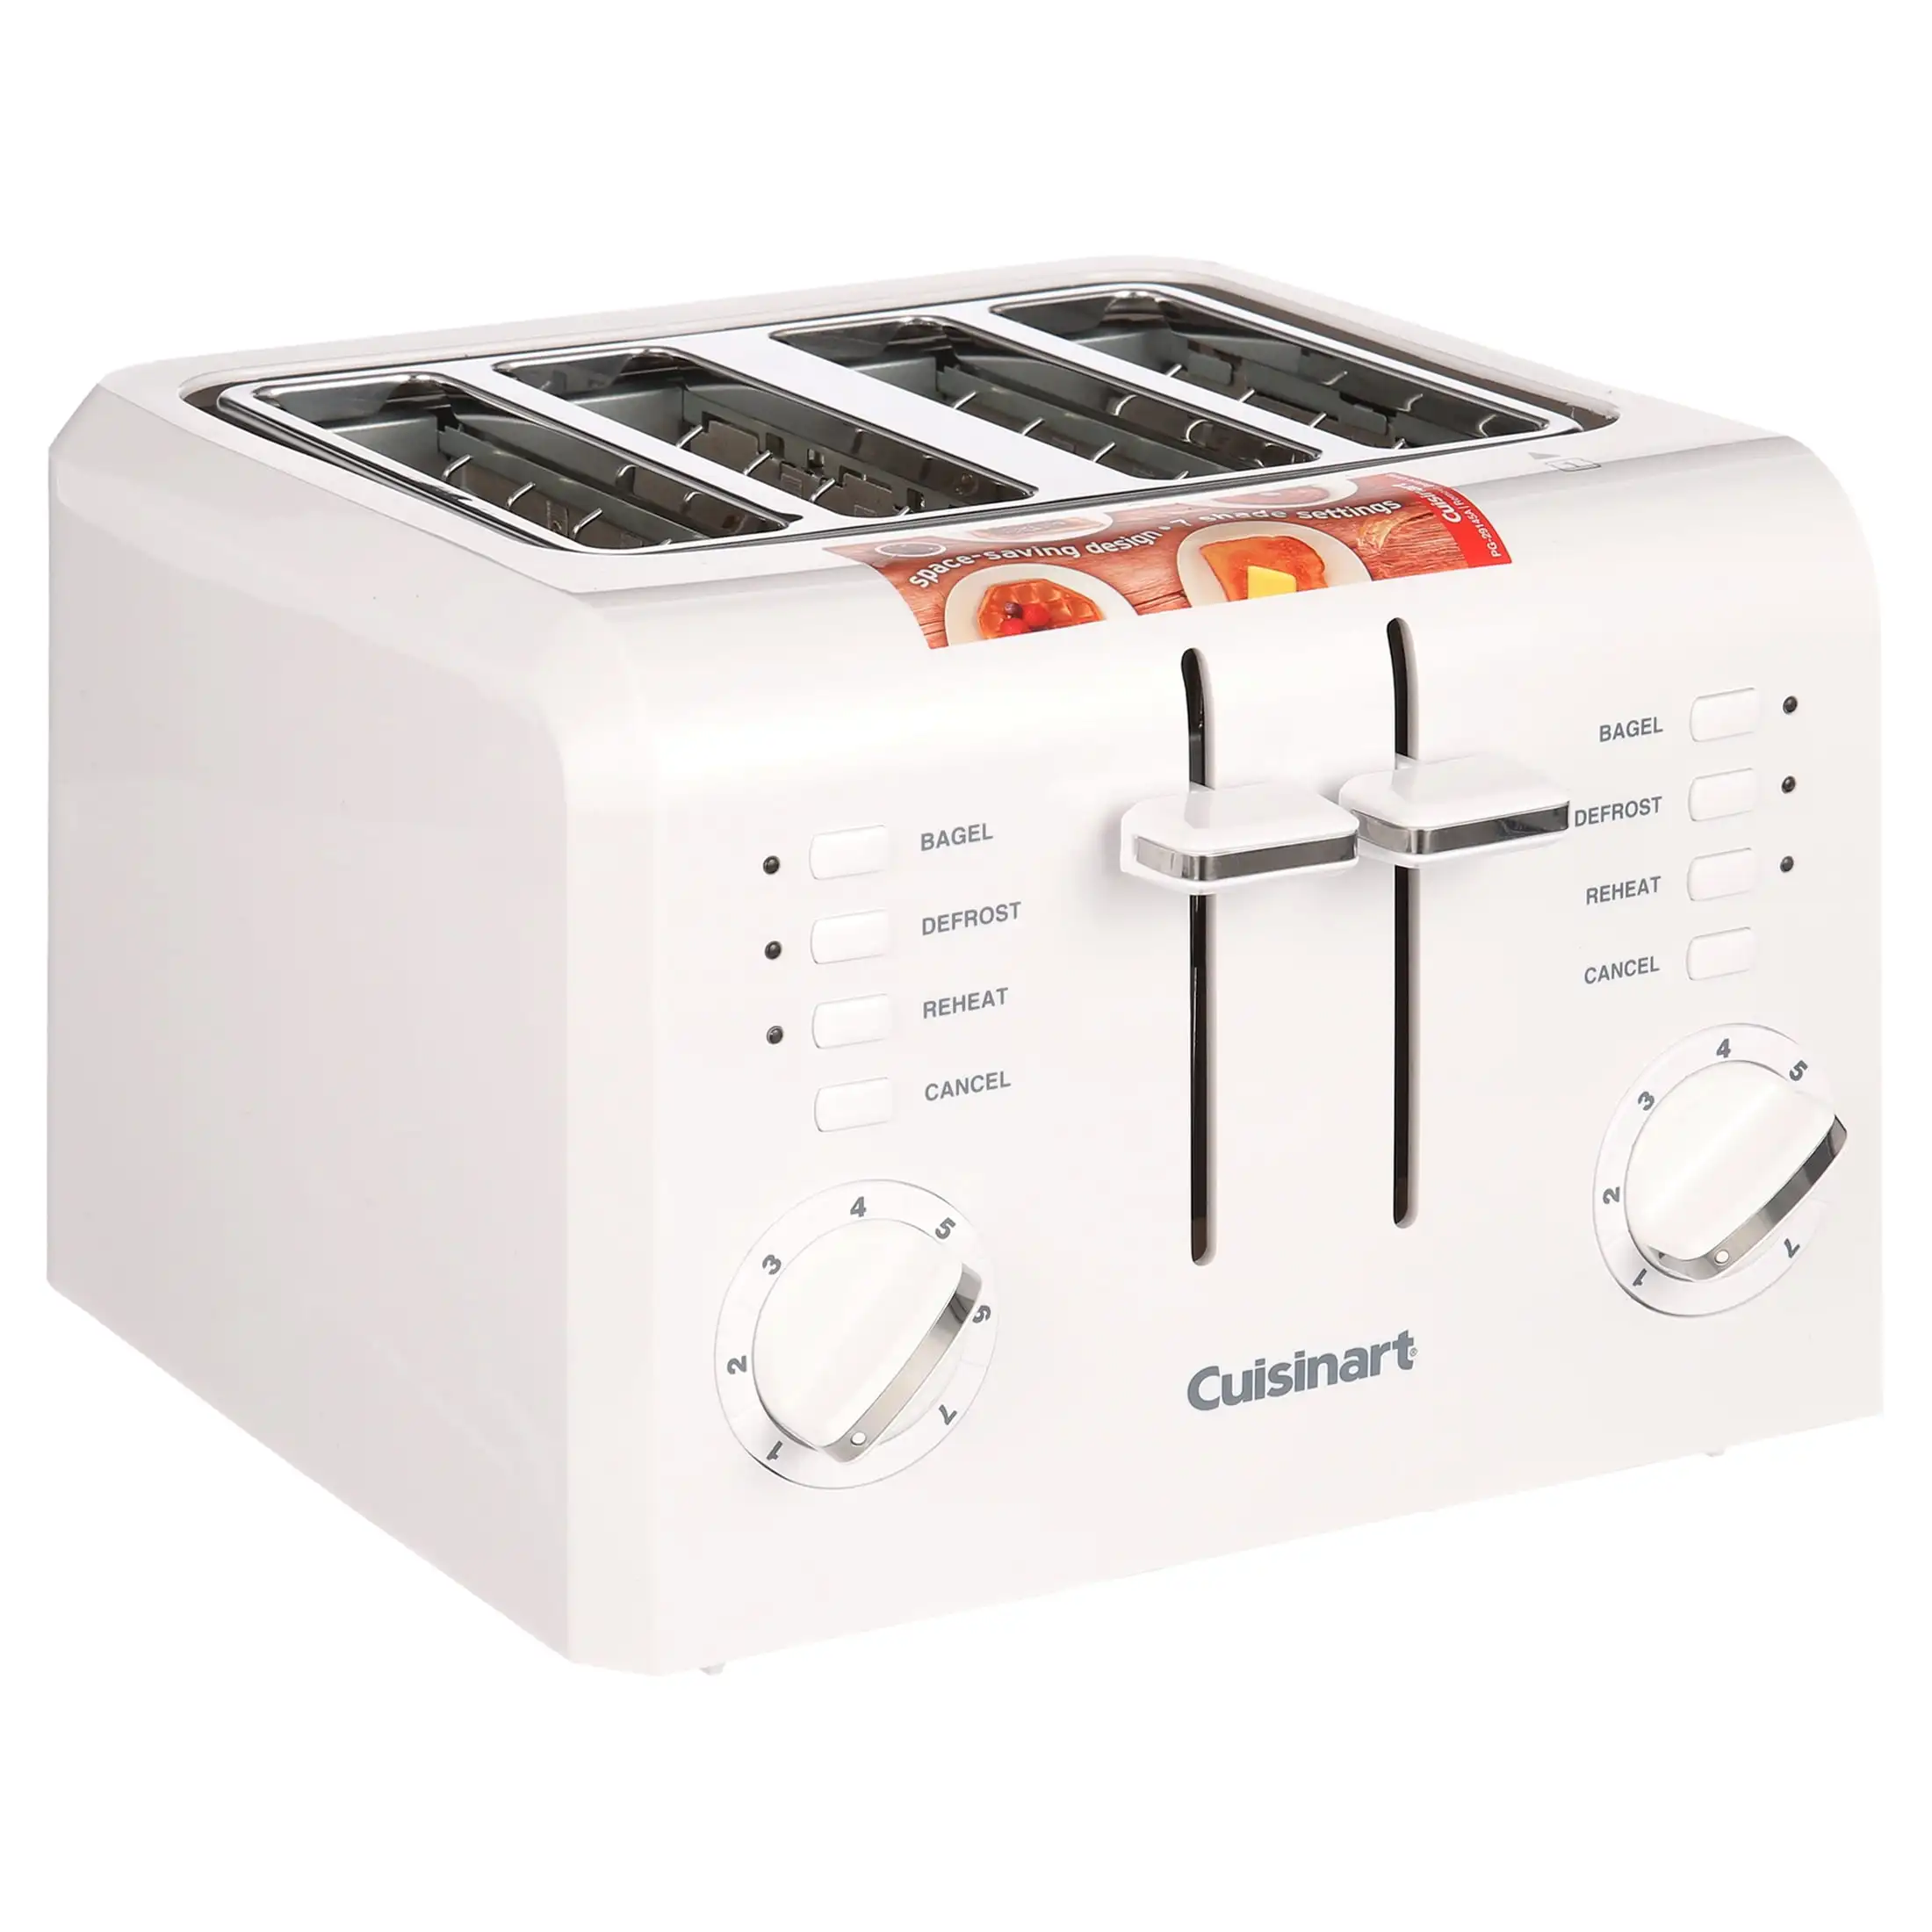 

Cuisinart Toasters 4 Slice Compact Plastic Toaster Toaster Oven Toaster Sandwich Maker